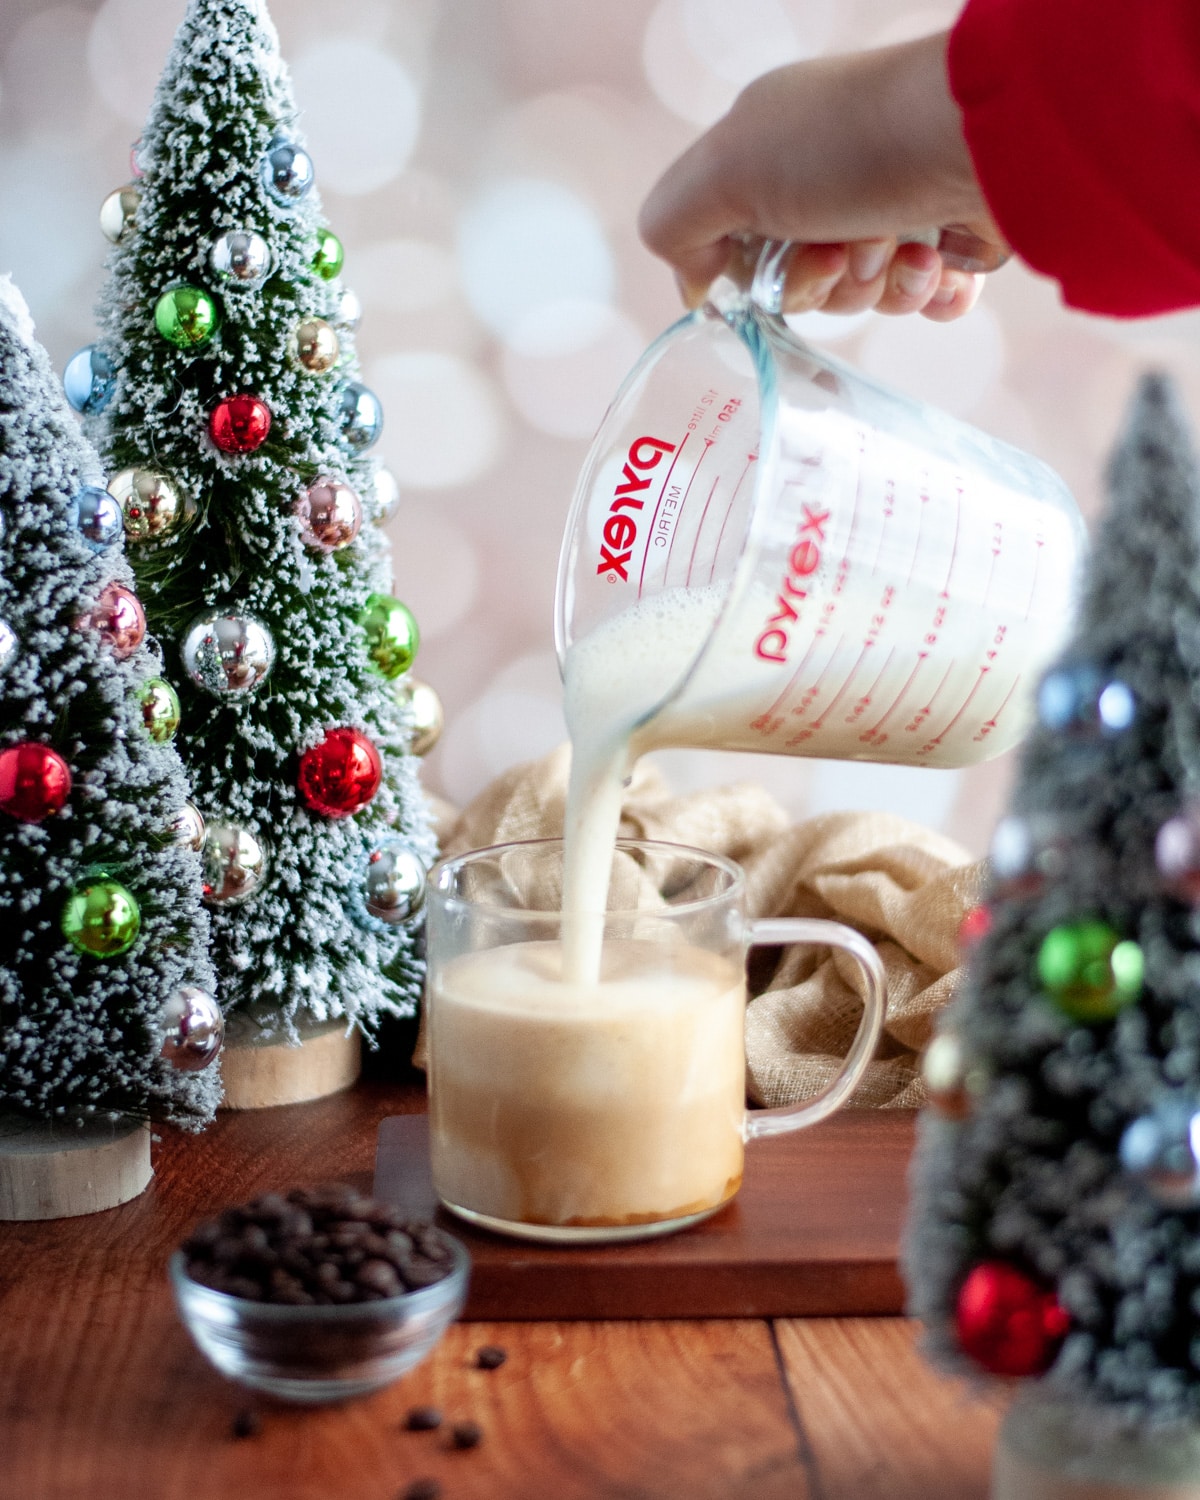 process shot for making an eggnog latte. shows frothed eggnog and milk being poured from a liquid measuring cup into a clear glass mug. the mug is on a wooden board and surrounded by miniature christmas trees with multi-colored ornaments, a golden linen, a small bowl of coffee beans, and a golden, twinkling background.